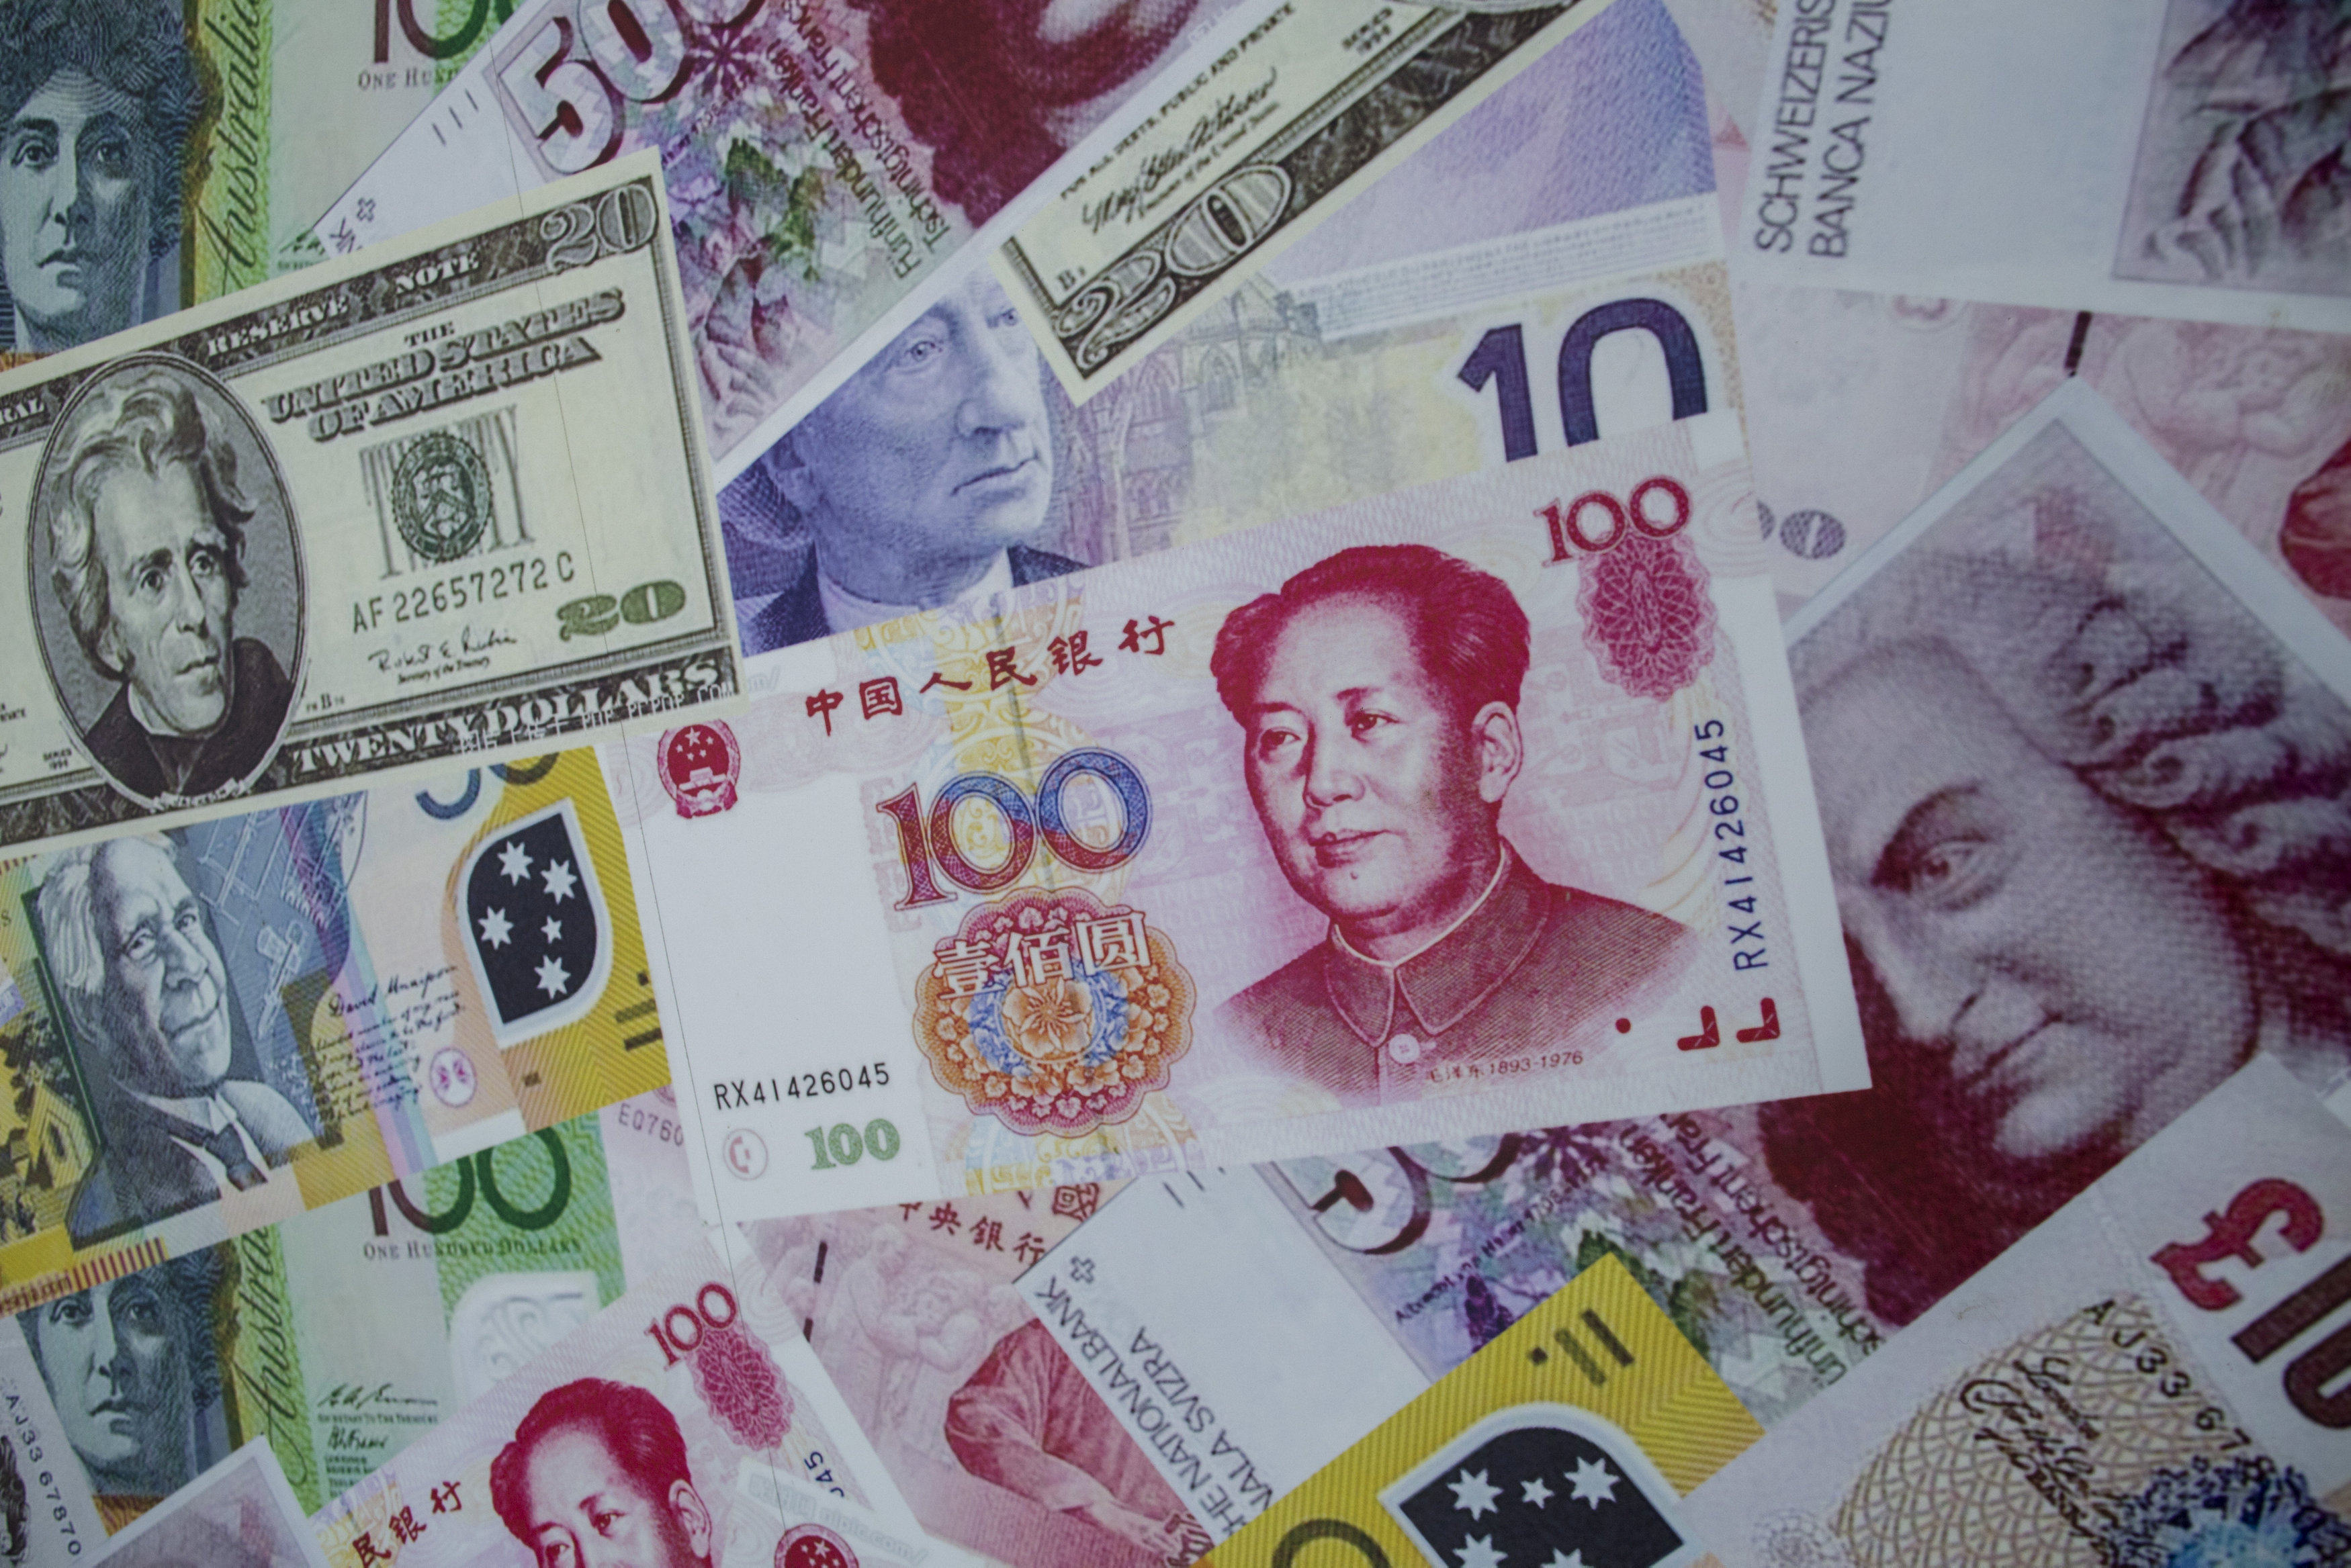 A poster at a foreign exchange shop in Hong Kong on August 13, 2015. The internationalisation of the yuan has advanced as countries seek an alternative currency in response to dollar risks. Photo: Reuters